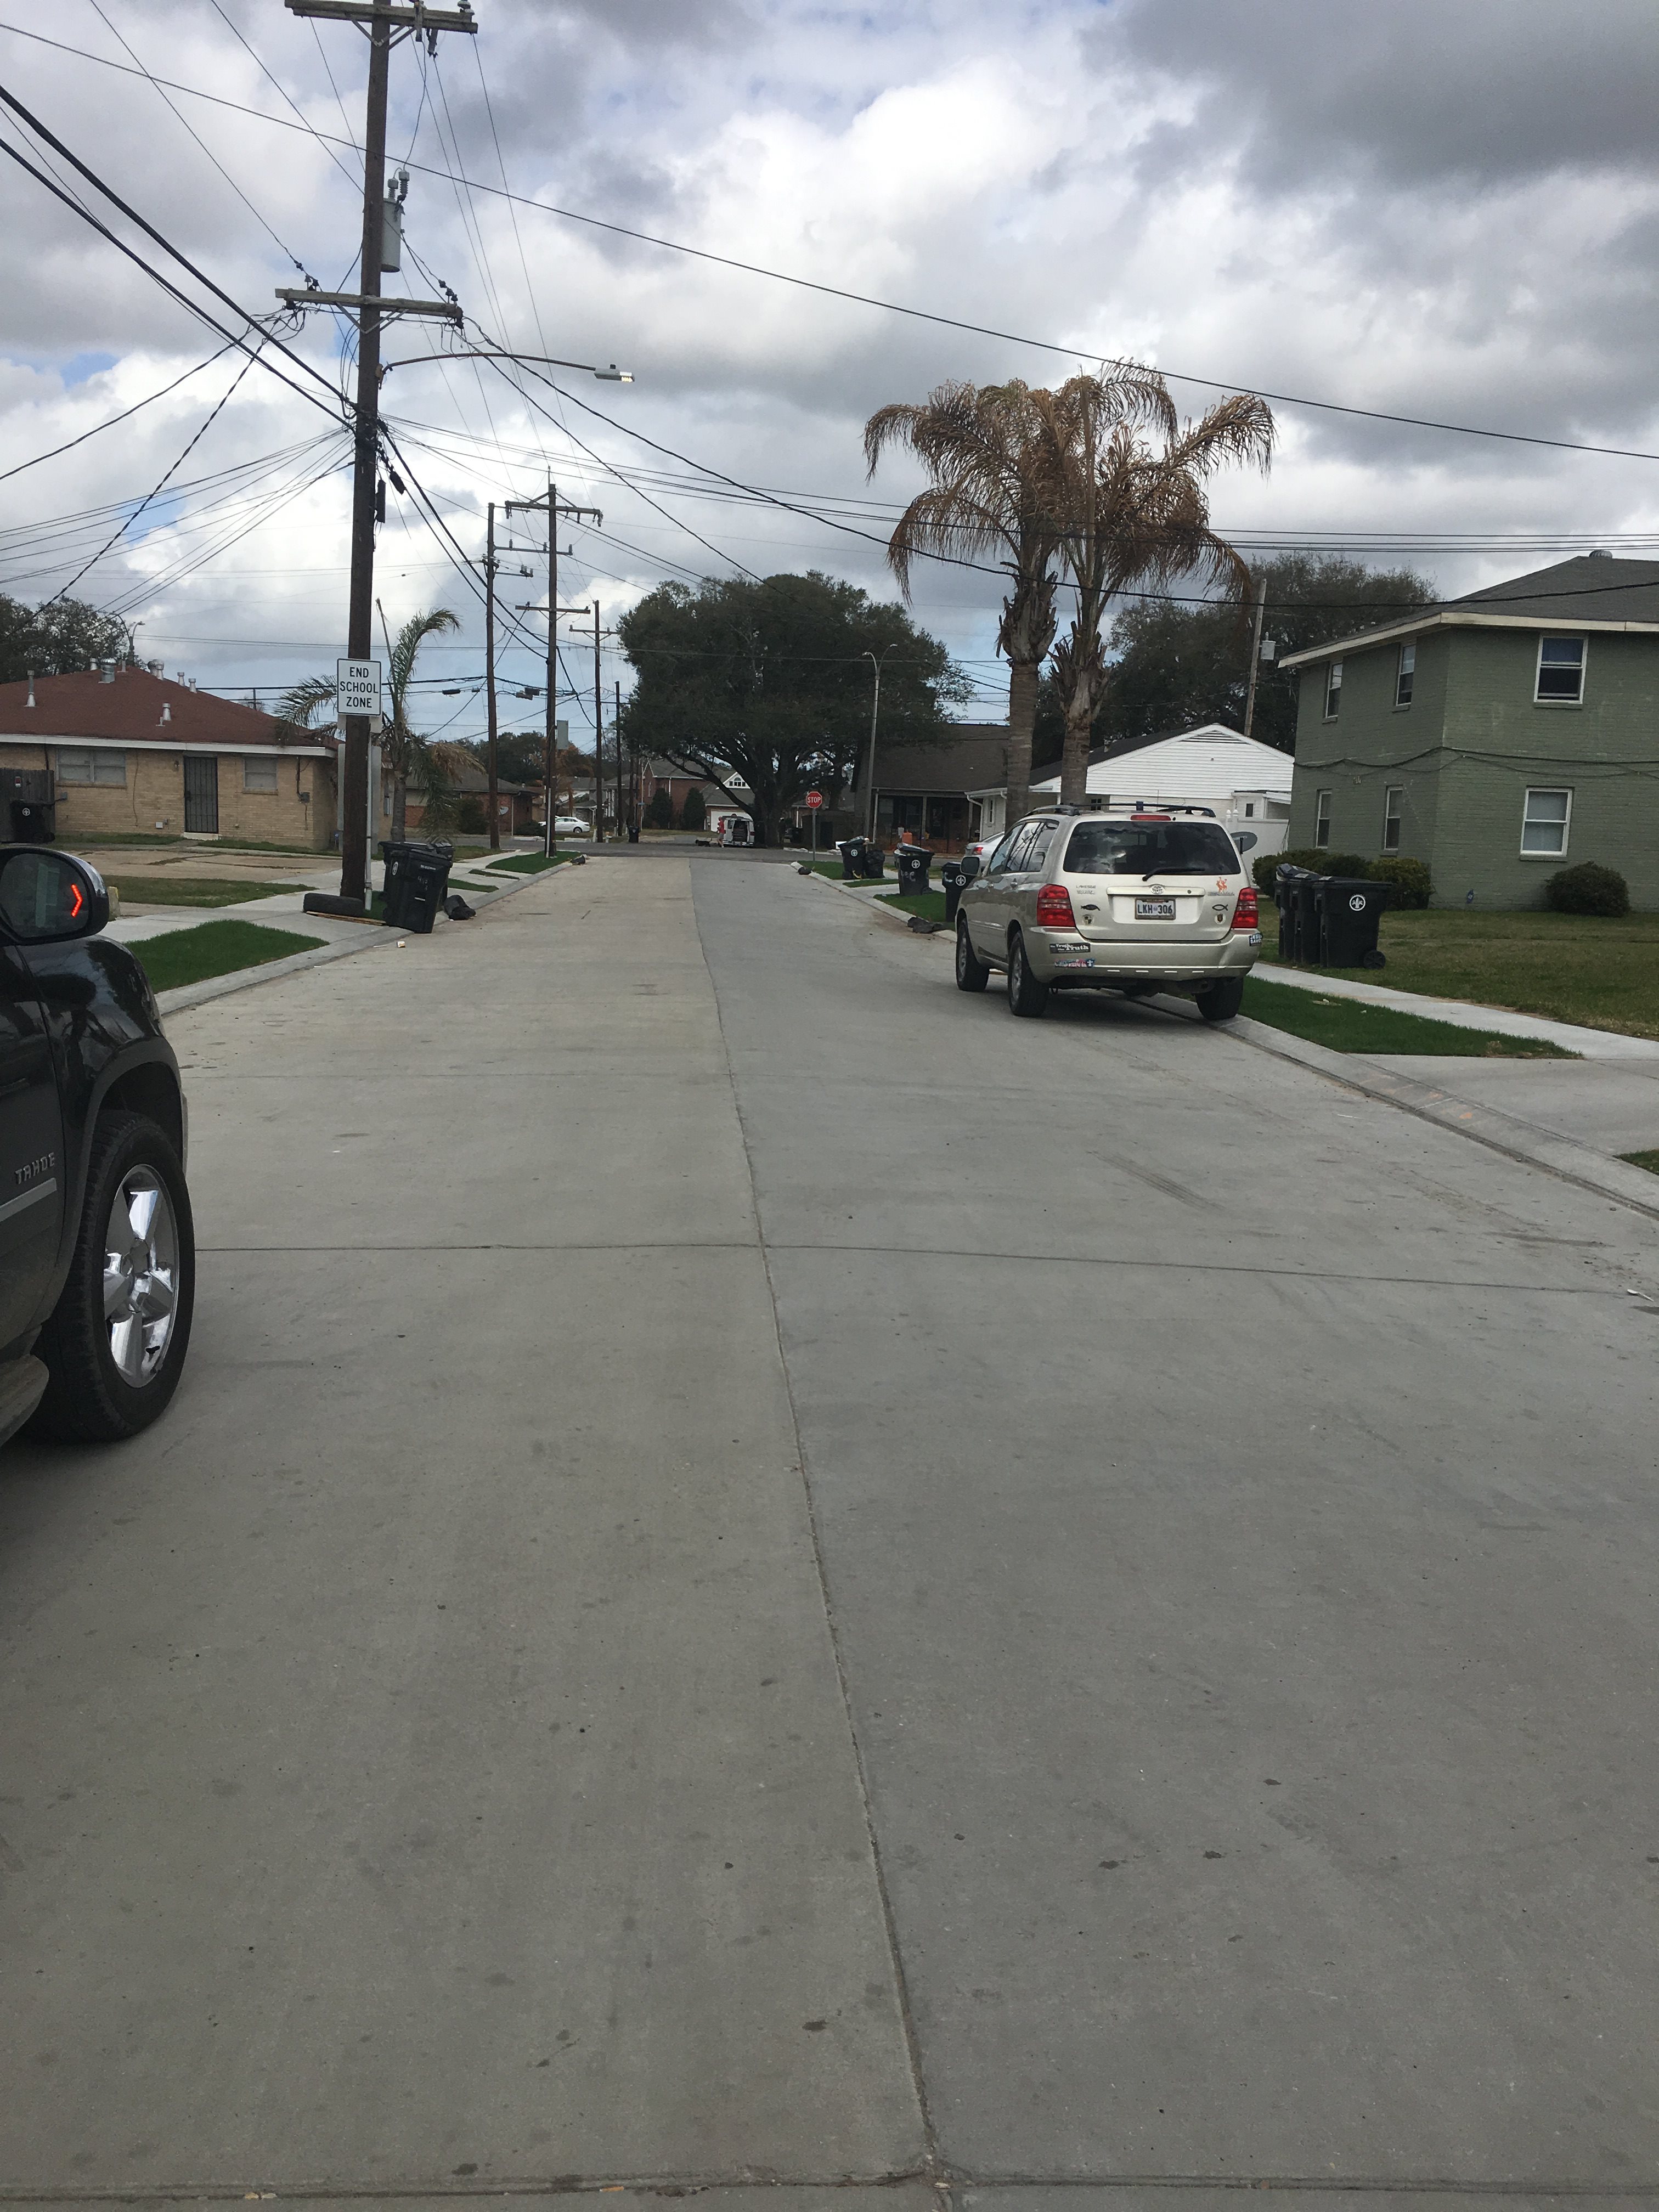 YOUTH STUDY CENTER STREETS PROJECT SCHEDULED FOR COMPLETION THIS MONTH